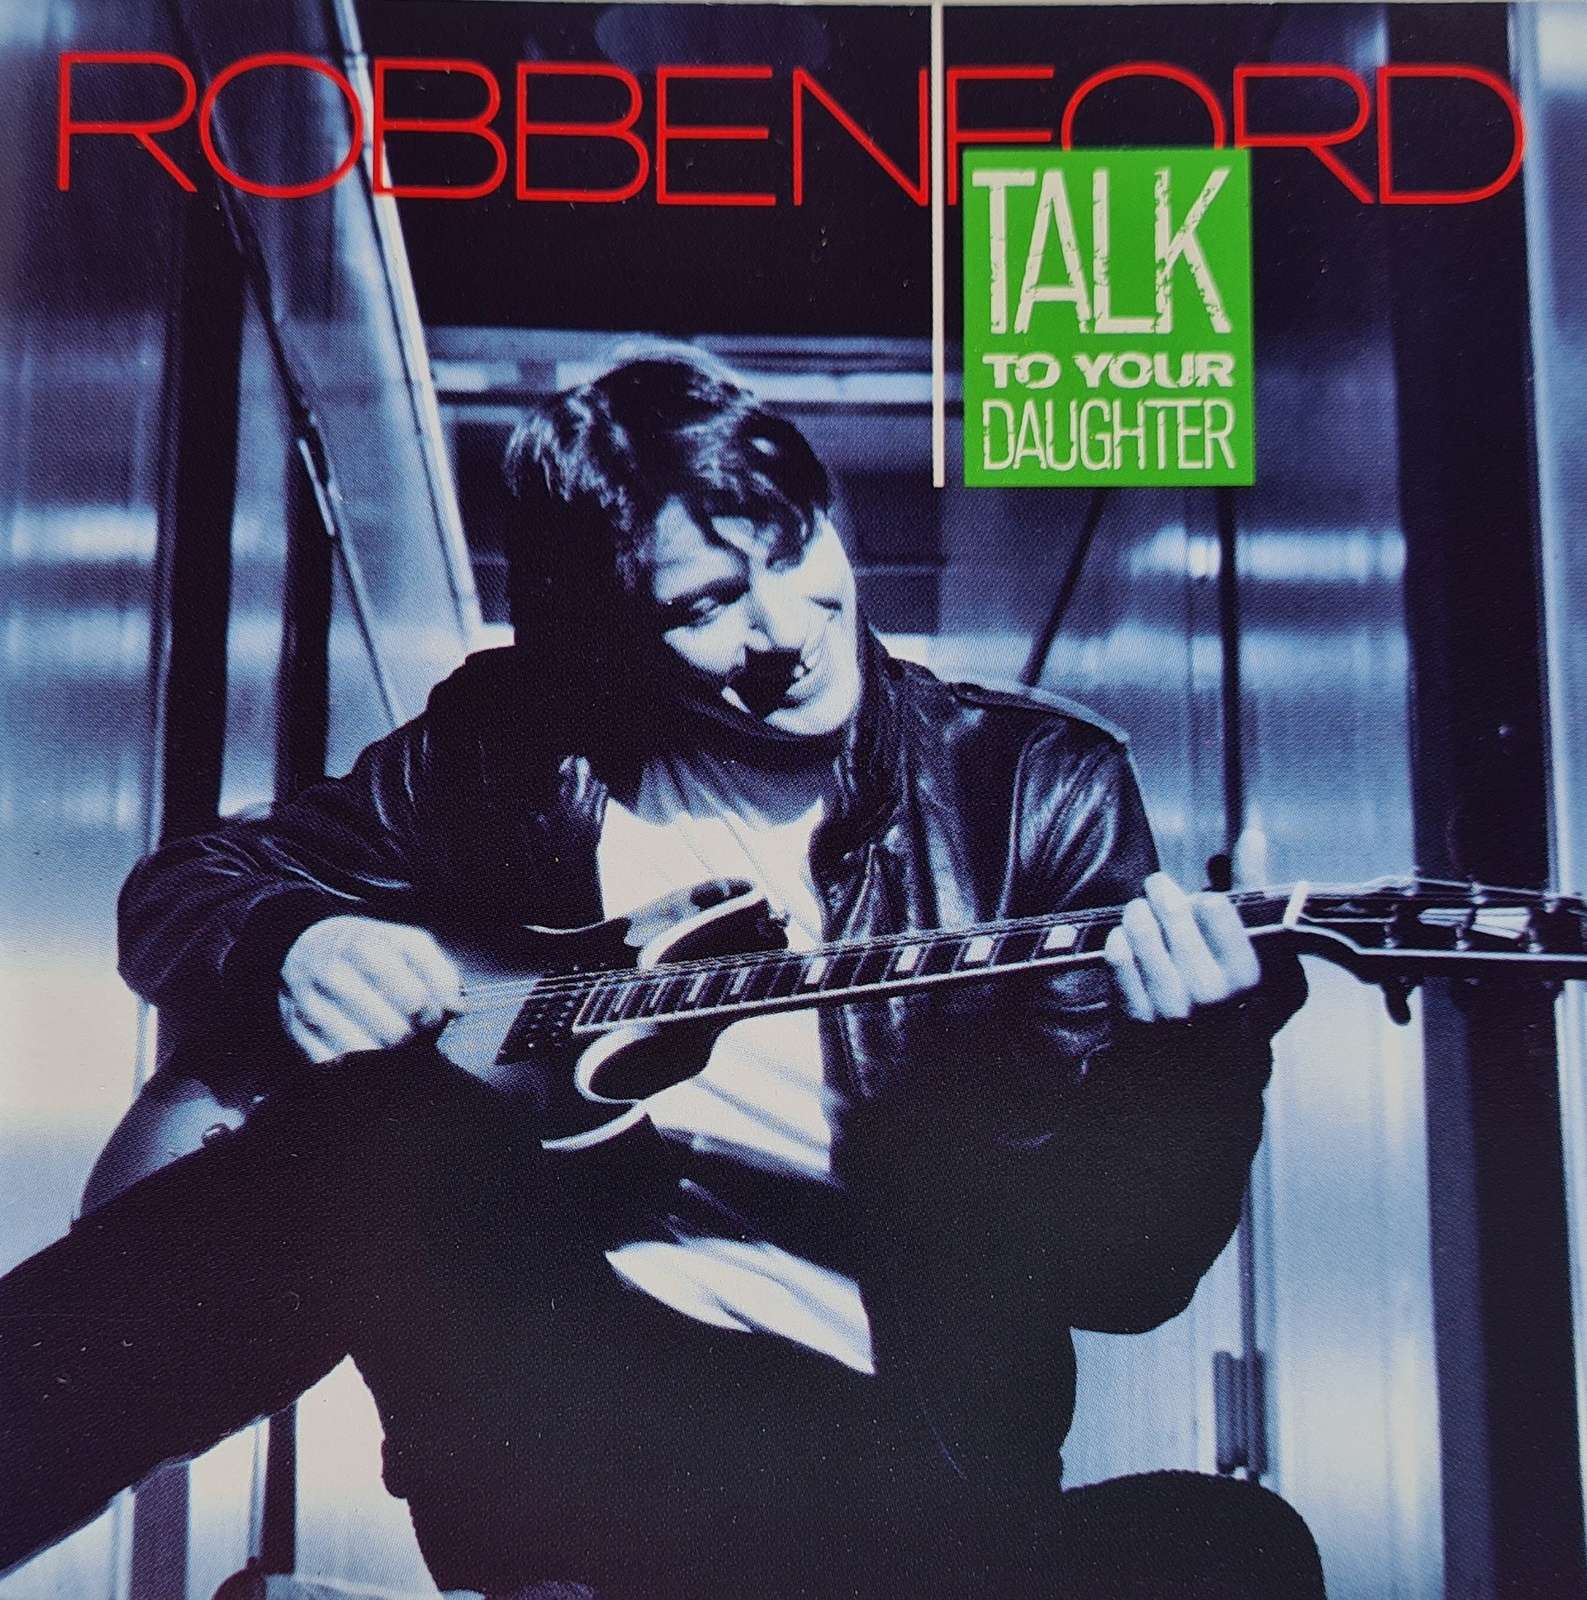 Robben Ford - Talk to Your Daughter (CD)